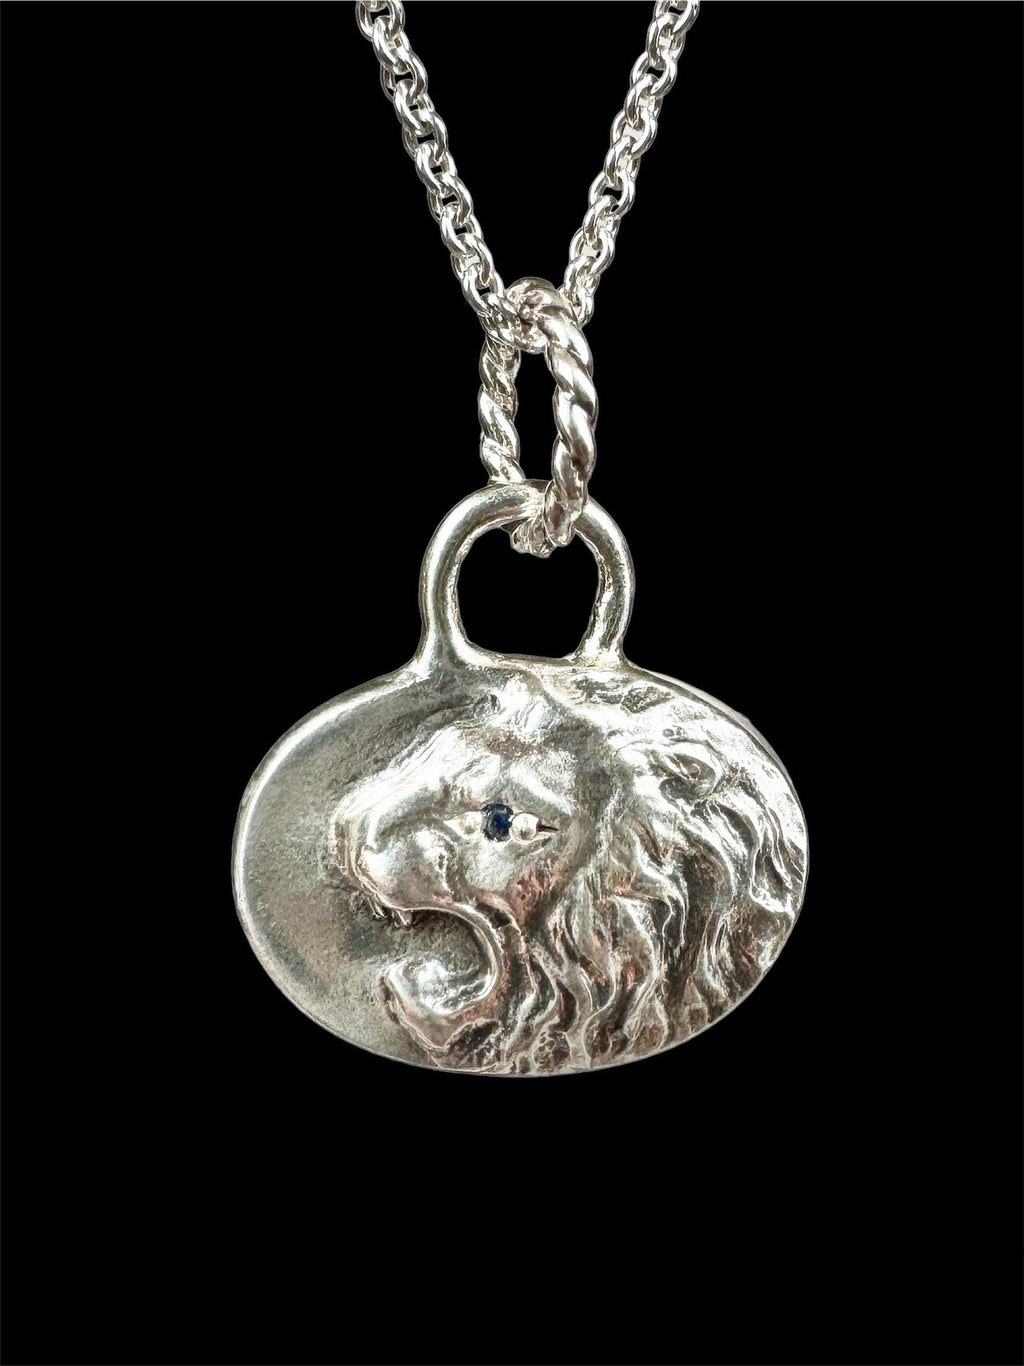 Roaring Lion Pendant with Blue Sapphire, sterling silver